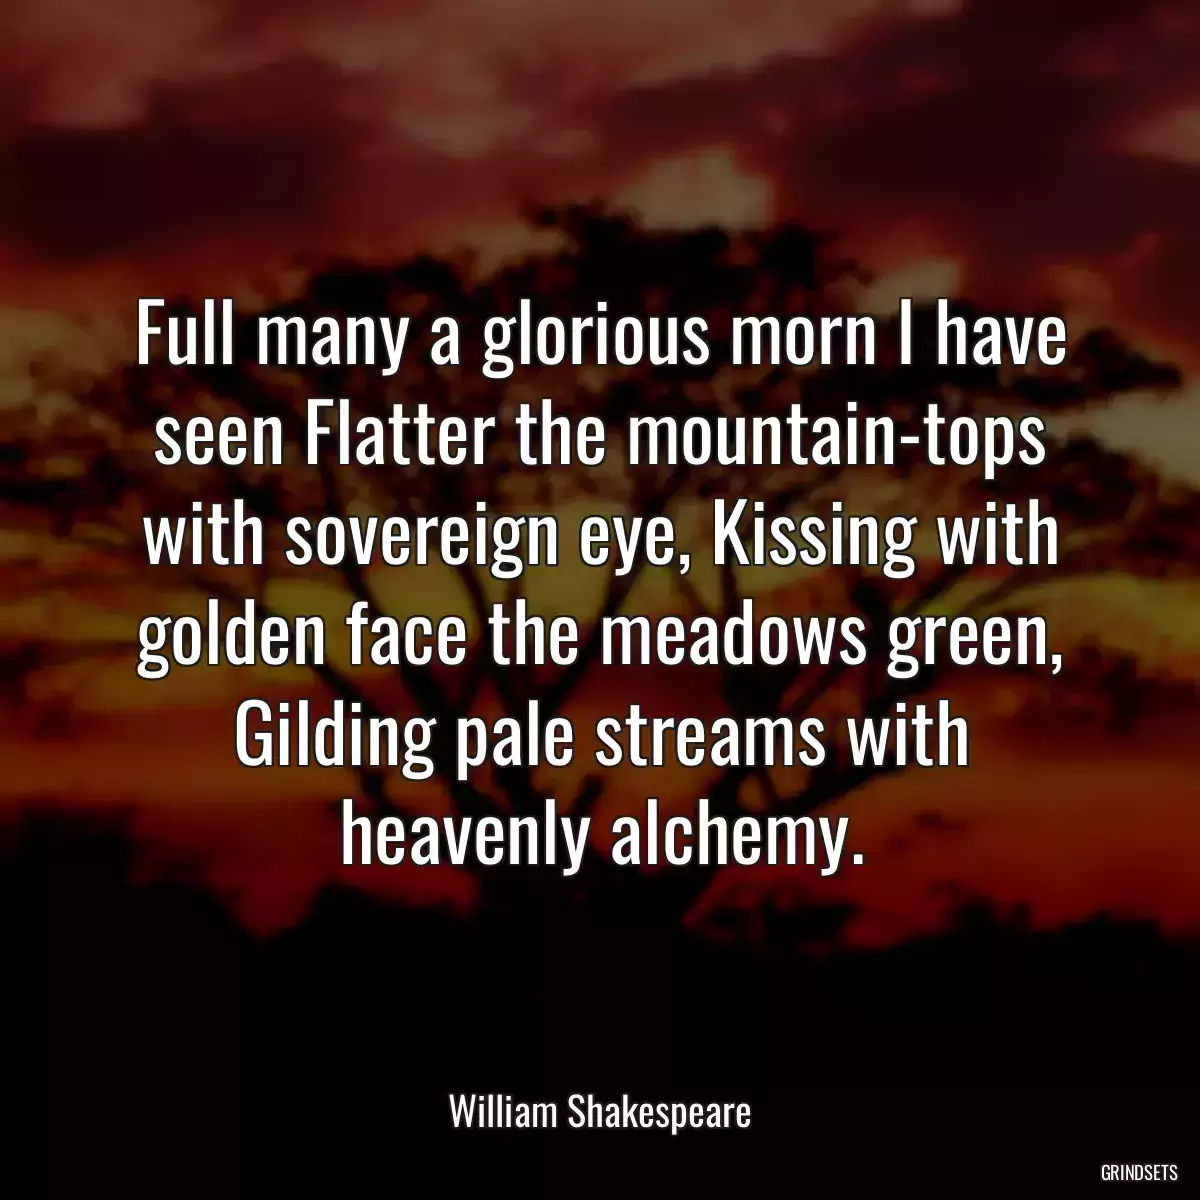 Full many a glorious morn I have seen Flatter the mountain-tops with sovereign eye, Kissing with golden face the meadows green, Gilding pale streams with heavenly alchemy.